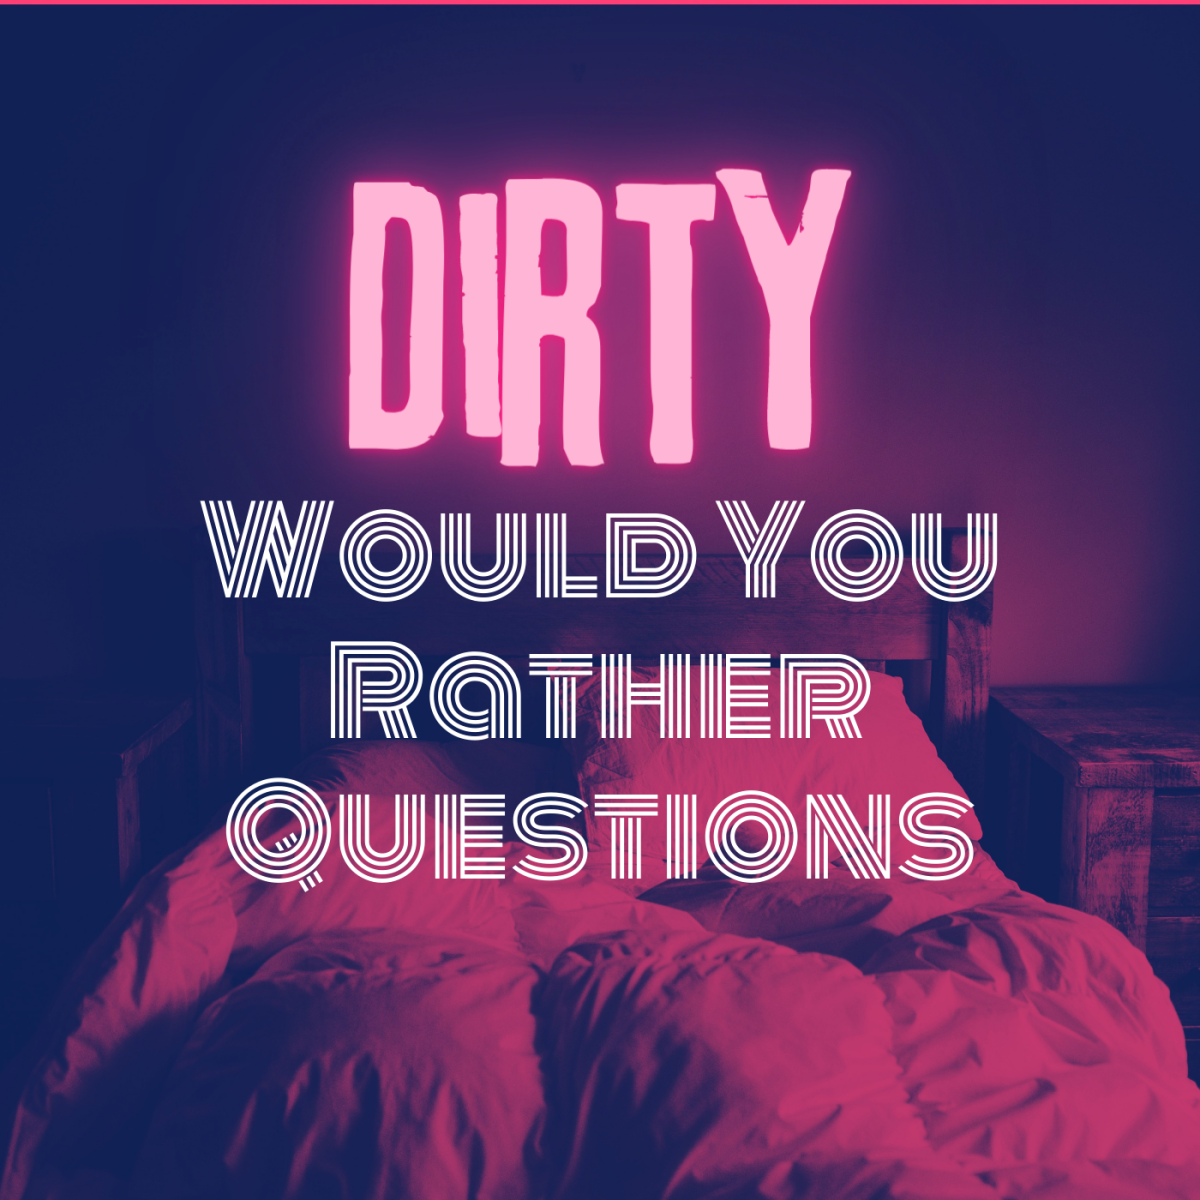 30 Dirty Would You Rather Questions - HobbyLark